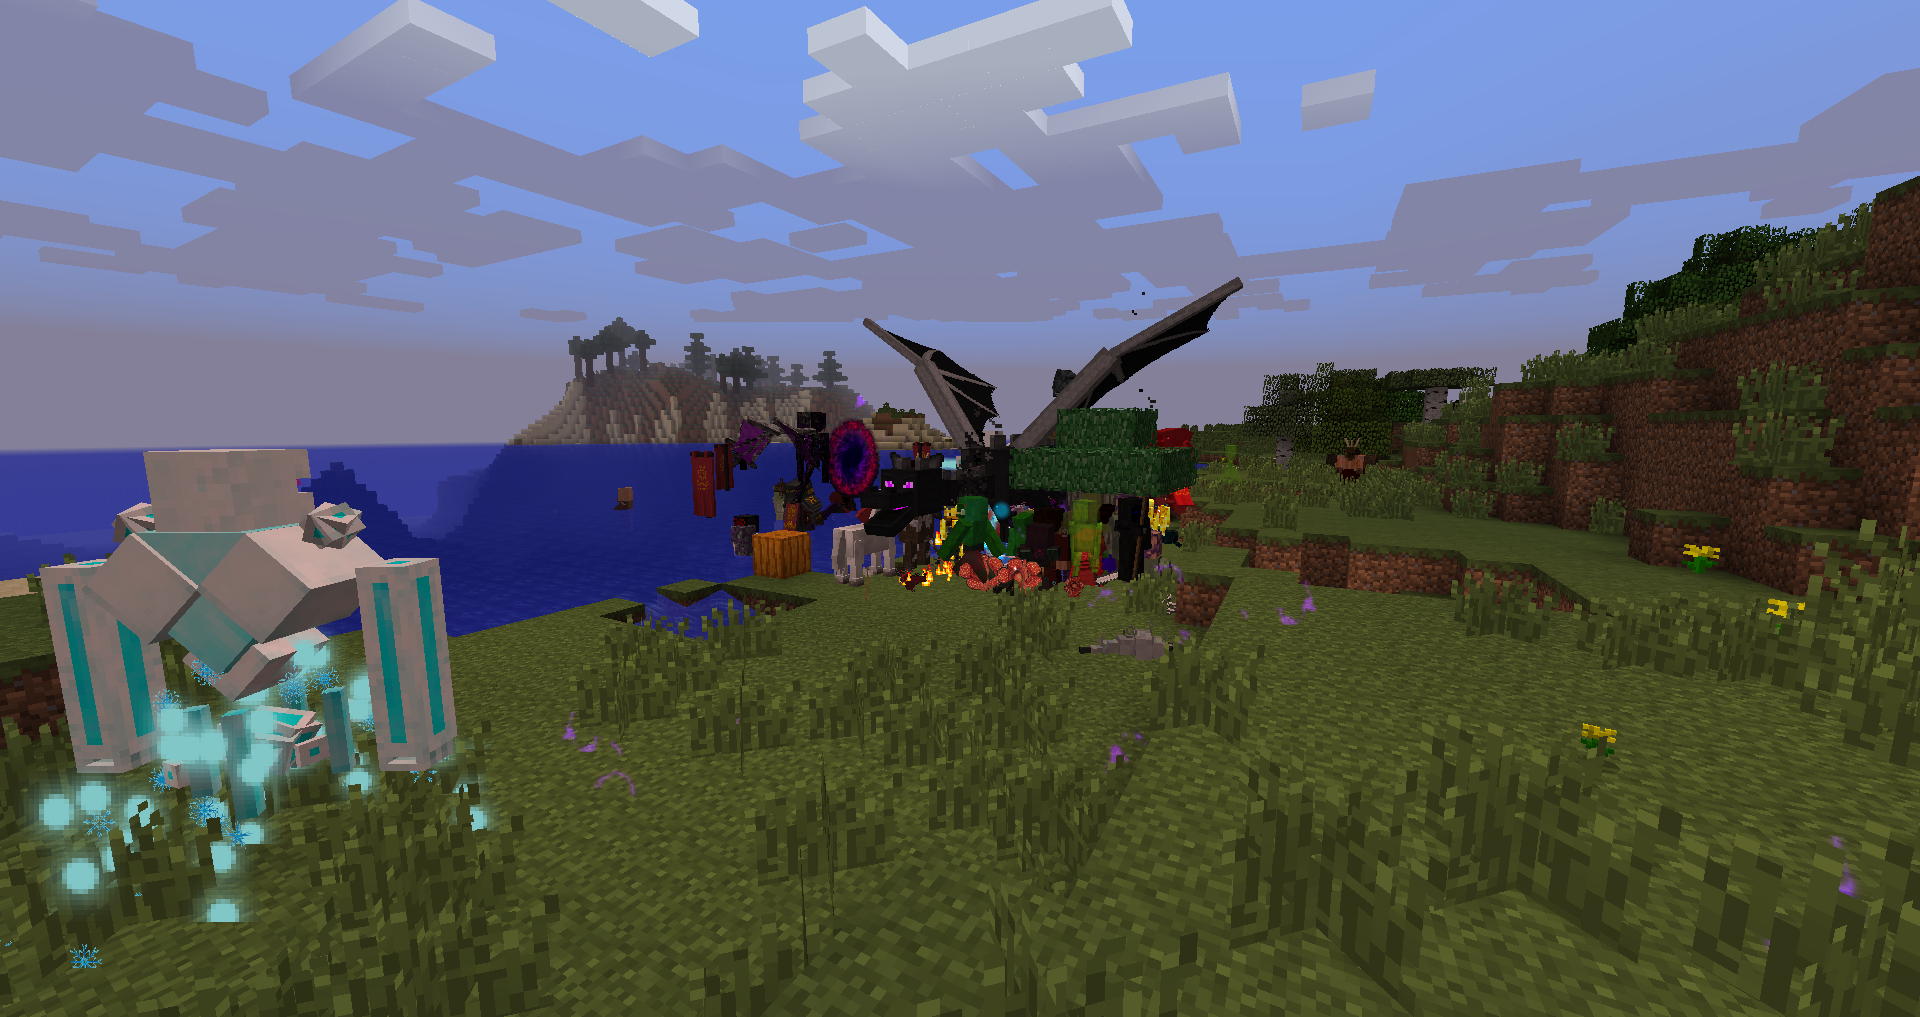 Spawnlesia spawned a hole bunch of mobs 